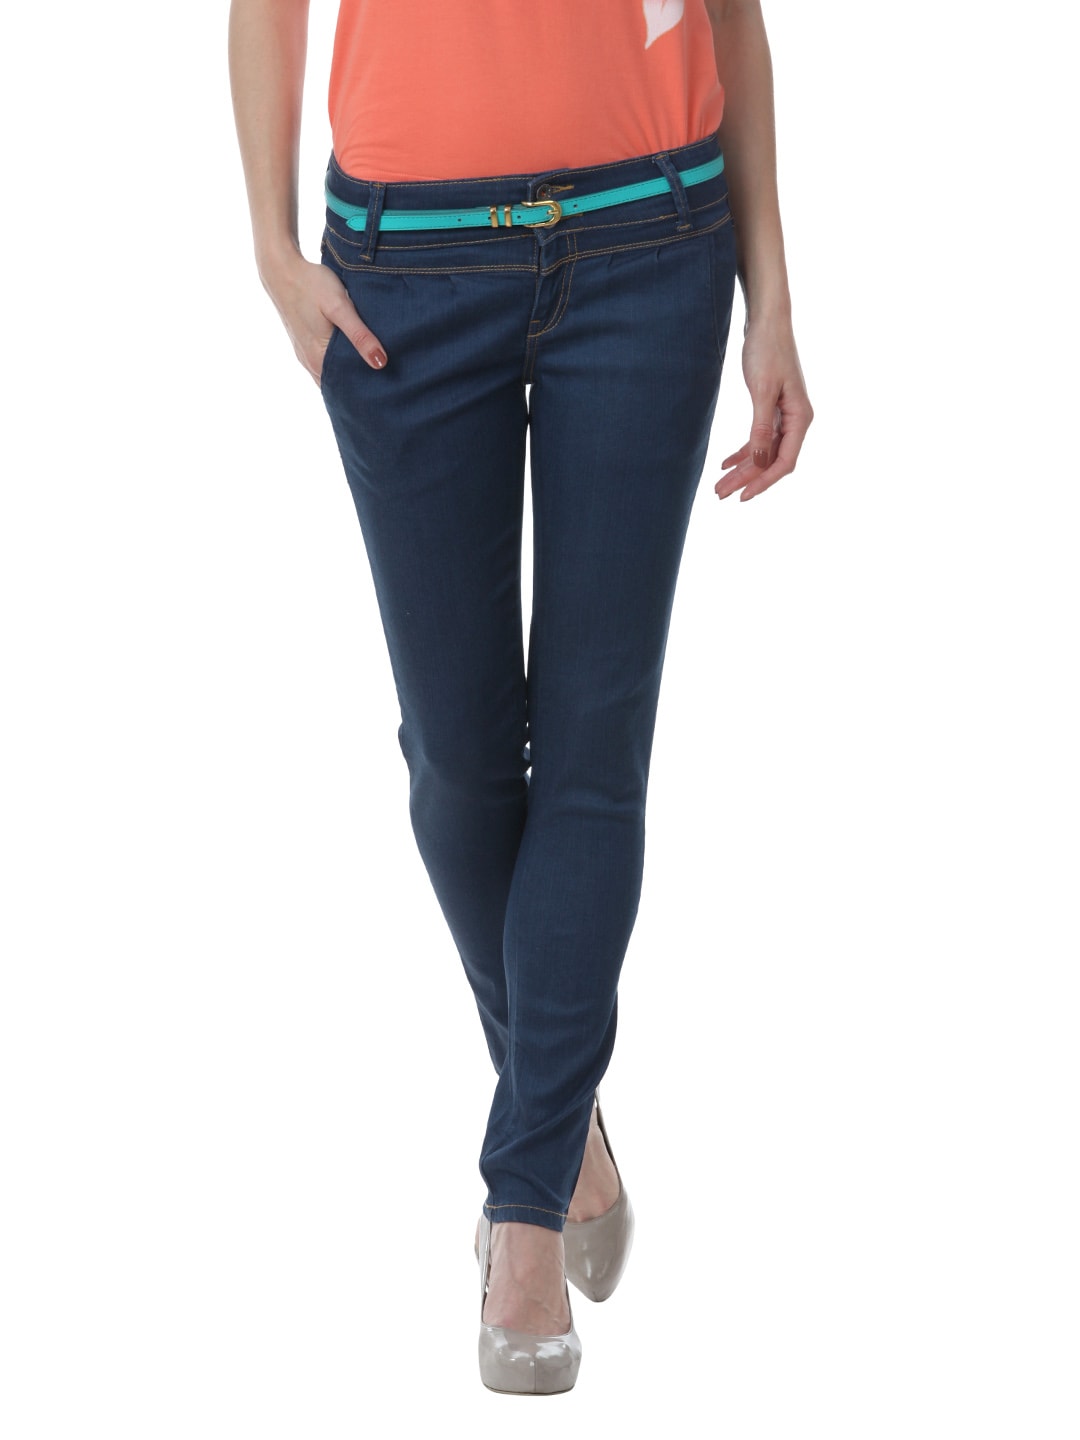 United Colors of Benetton Women Navy Blue Jeans